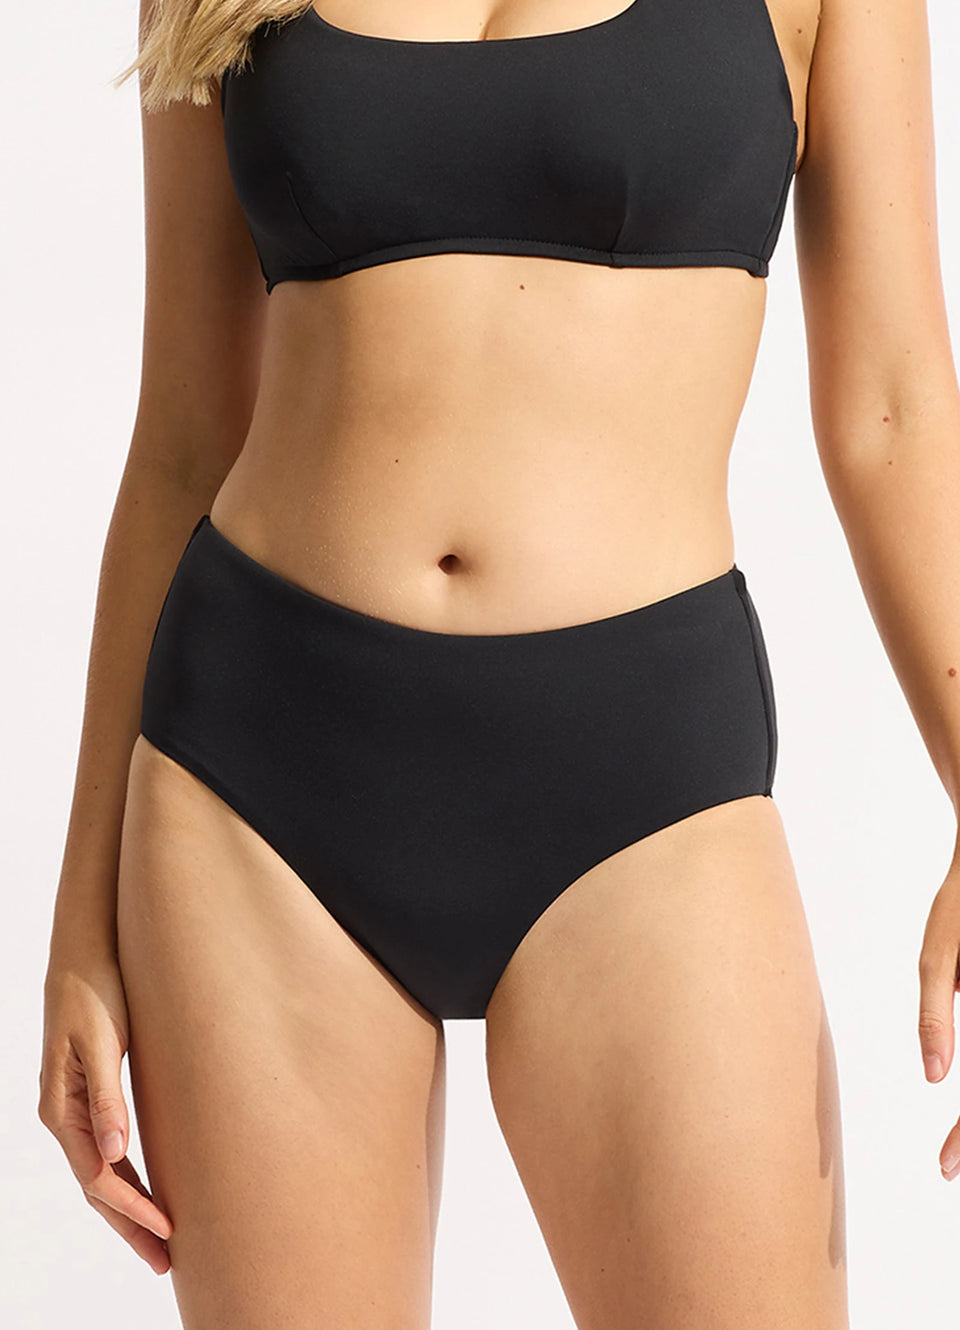 Seafolly SF Collective Wide Side Retro in True Navy – Sandpipers